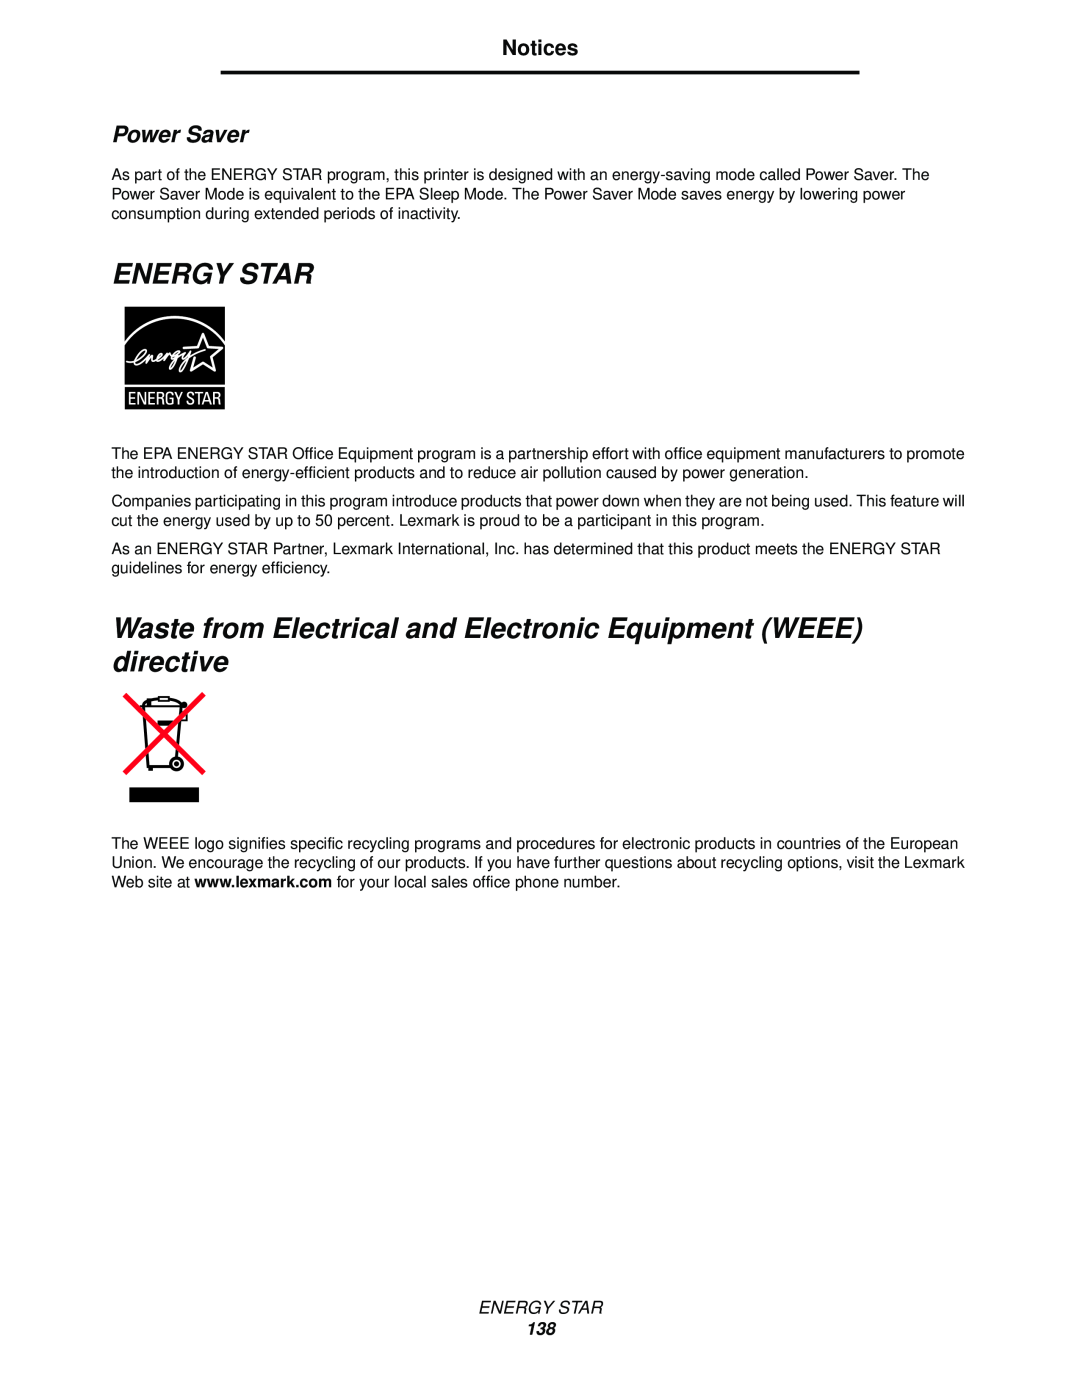 Lexmark C524, C520, C522 Energy Star, Waste from Electrical and Electronic Equipment WEEE directive, Power Saver, Notices 